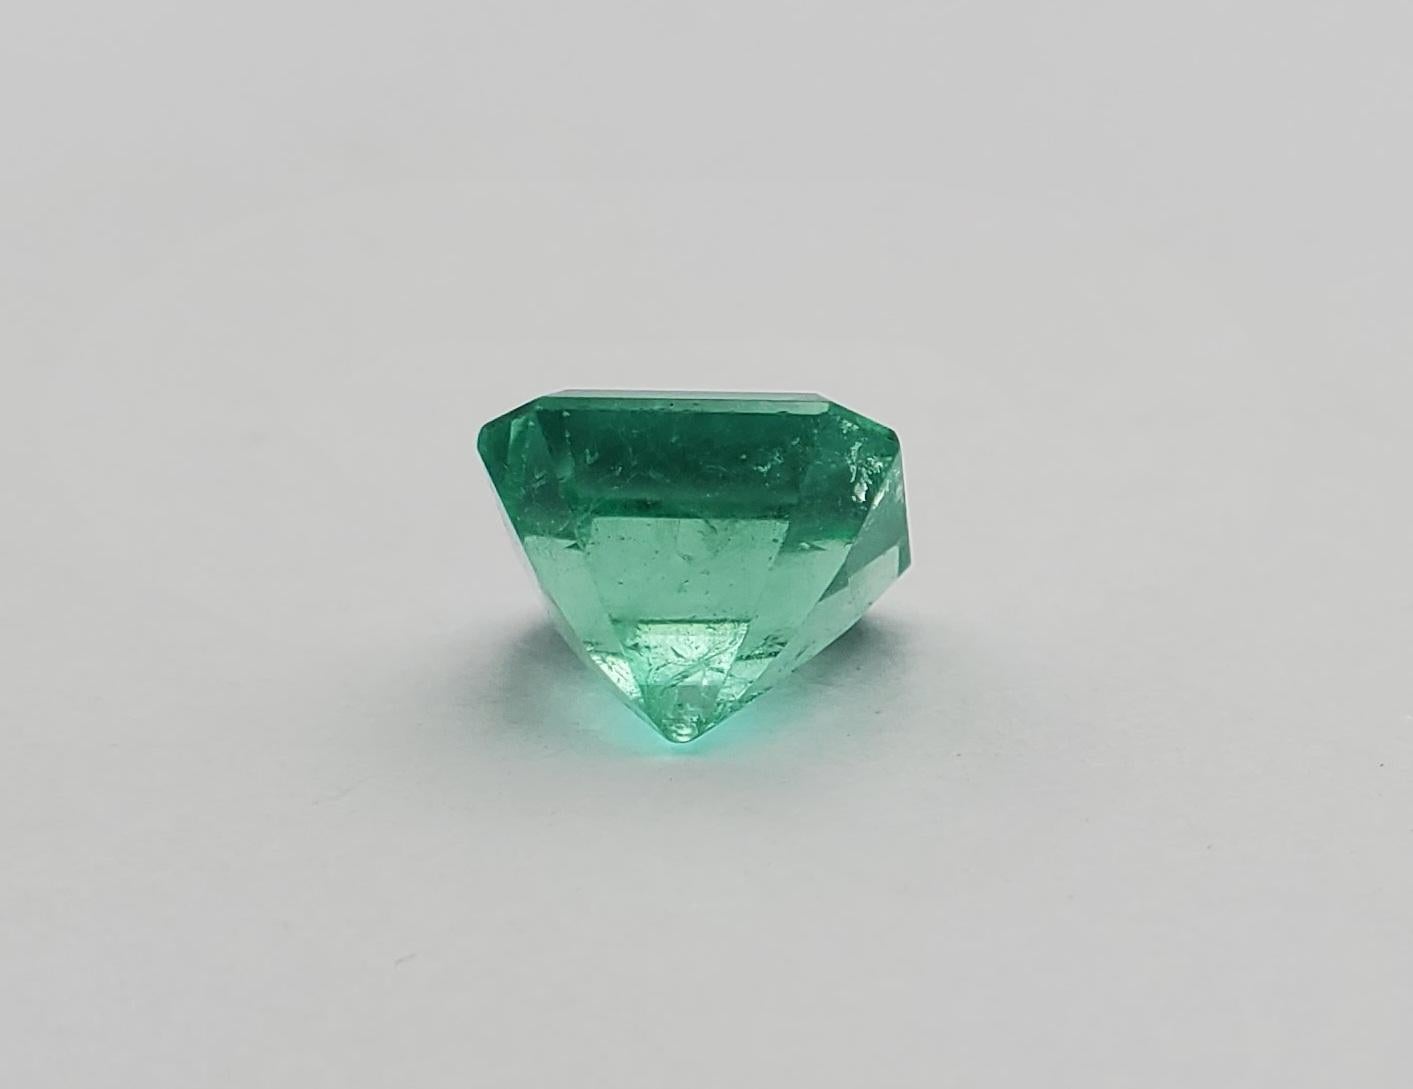 Octagon Cut Showstopping 2.93ct Octagonal Cut Natural Emerald GIA Certified